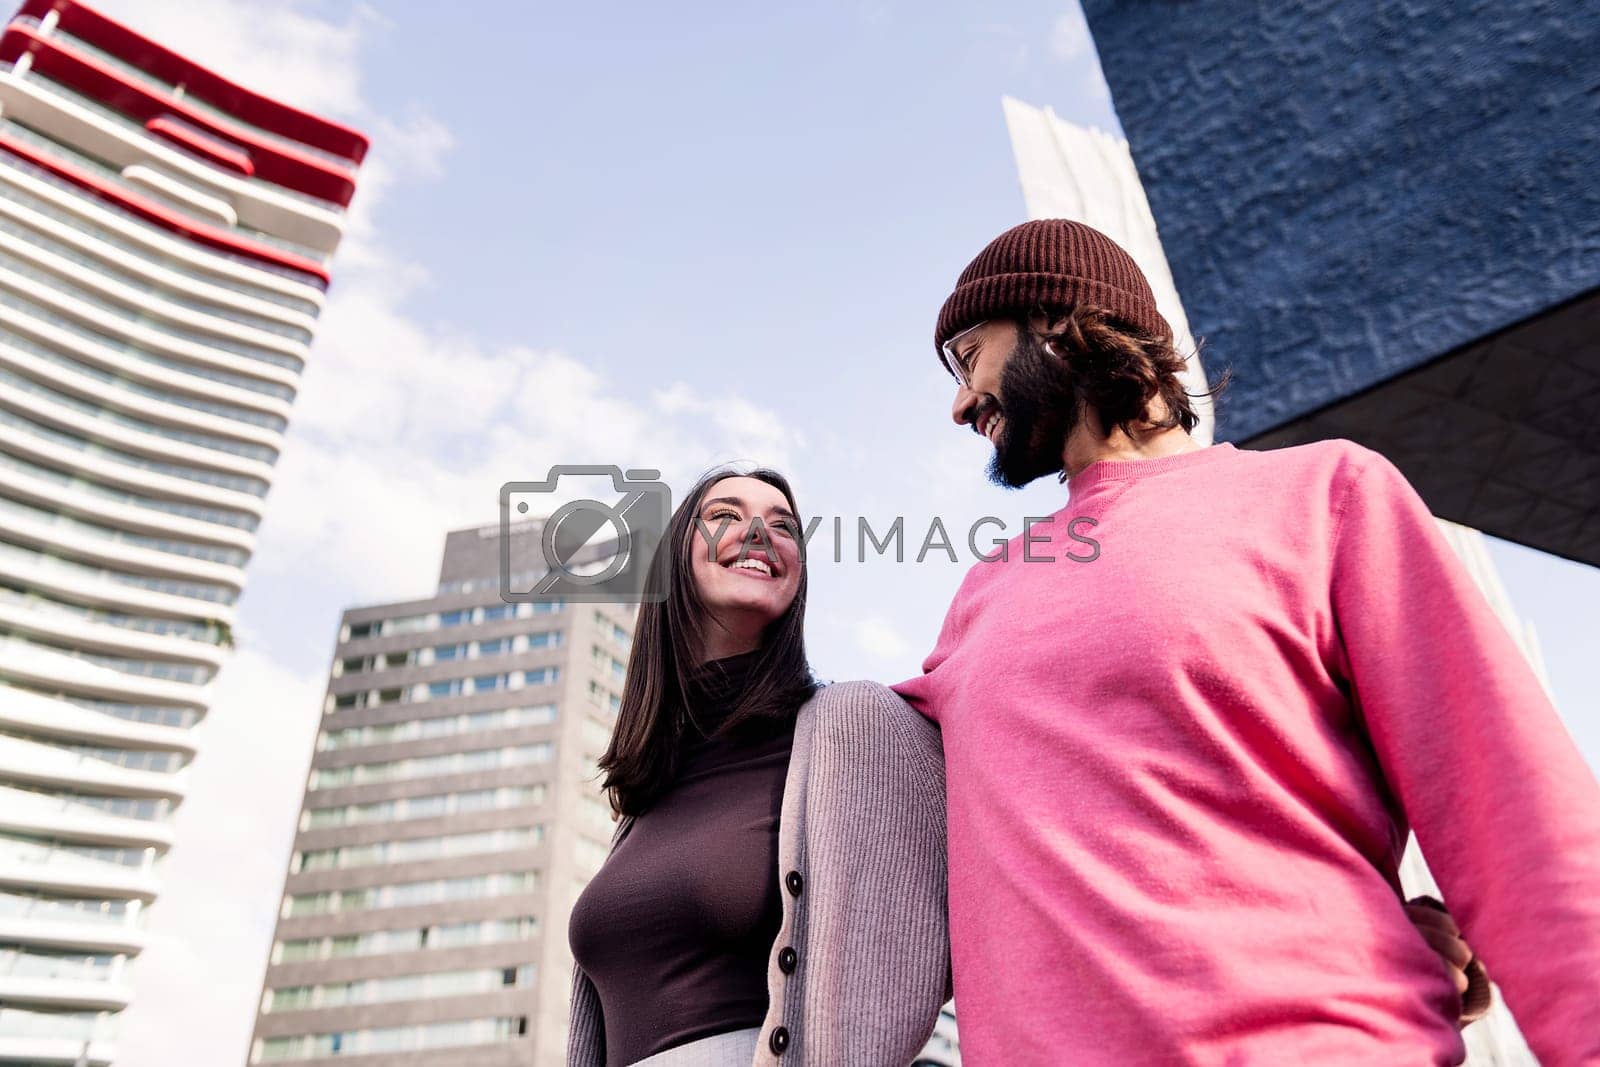 Royalty free image of affectionate young couple smiling on romantic walk by raulmelldo